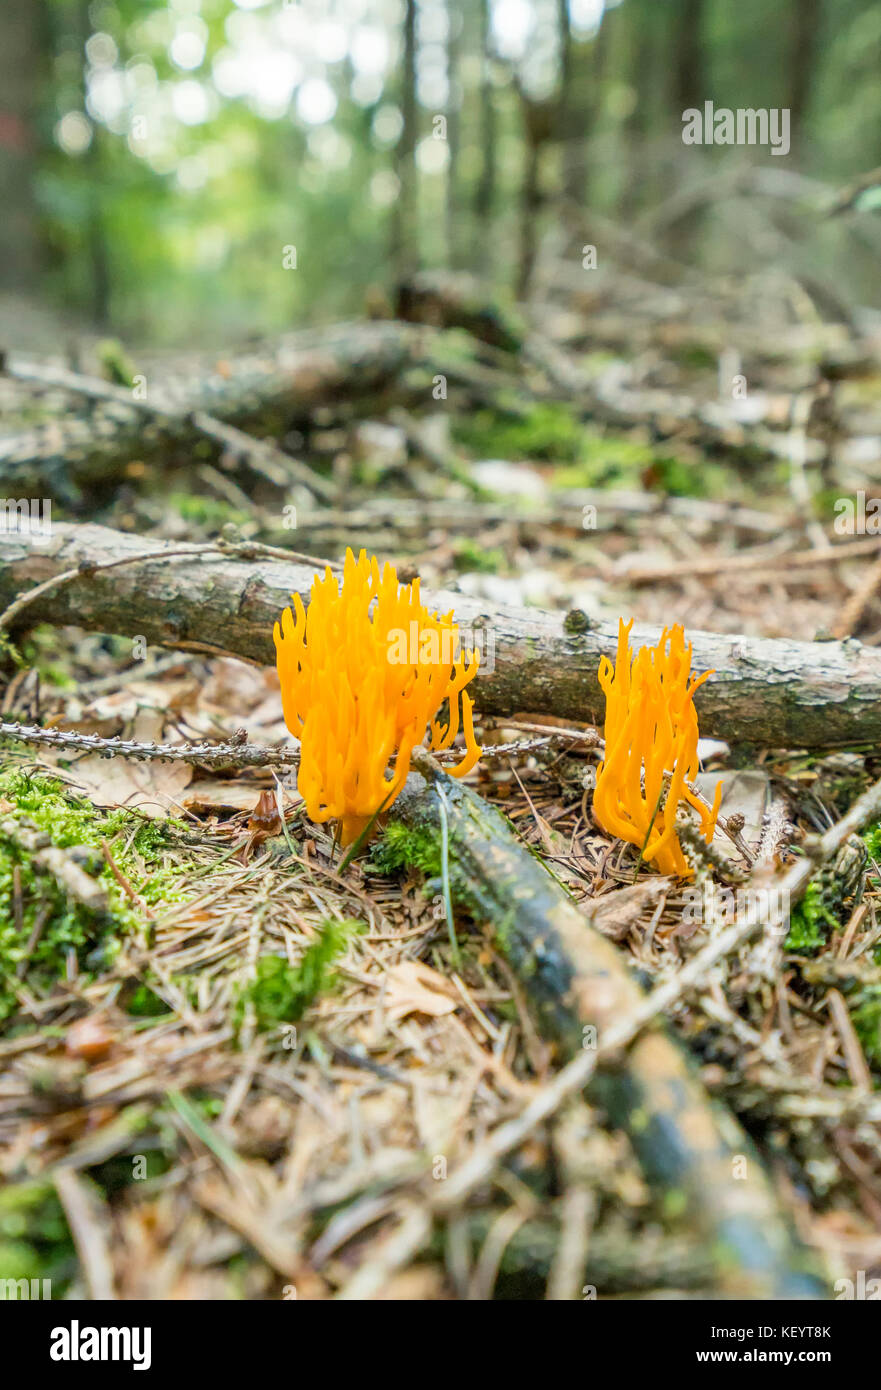 low angle shot of a orange coral fungi in forest ambiance Stock Photo